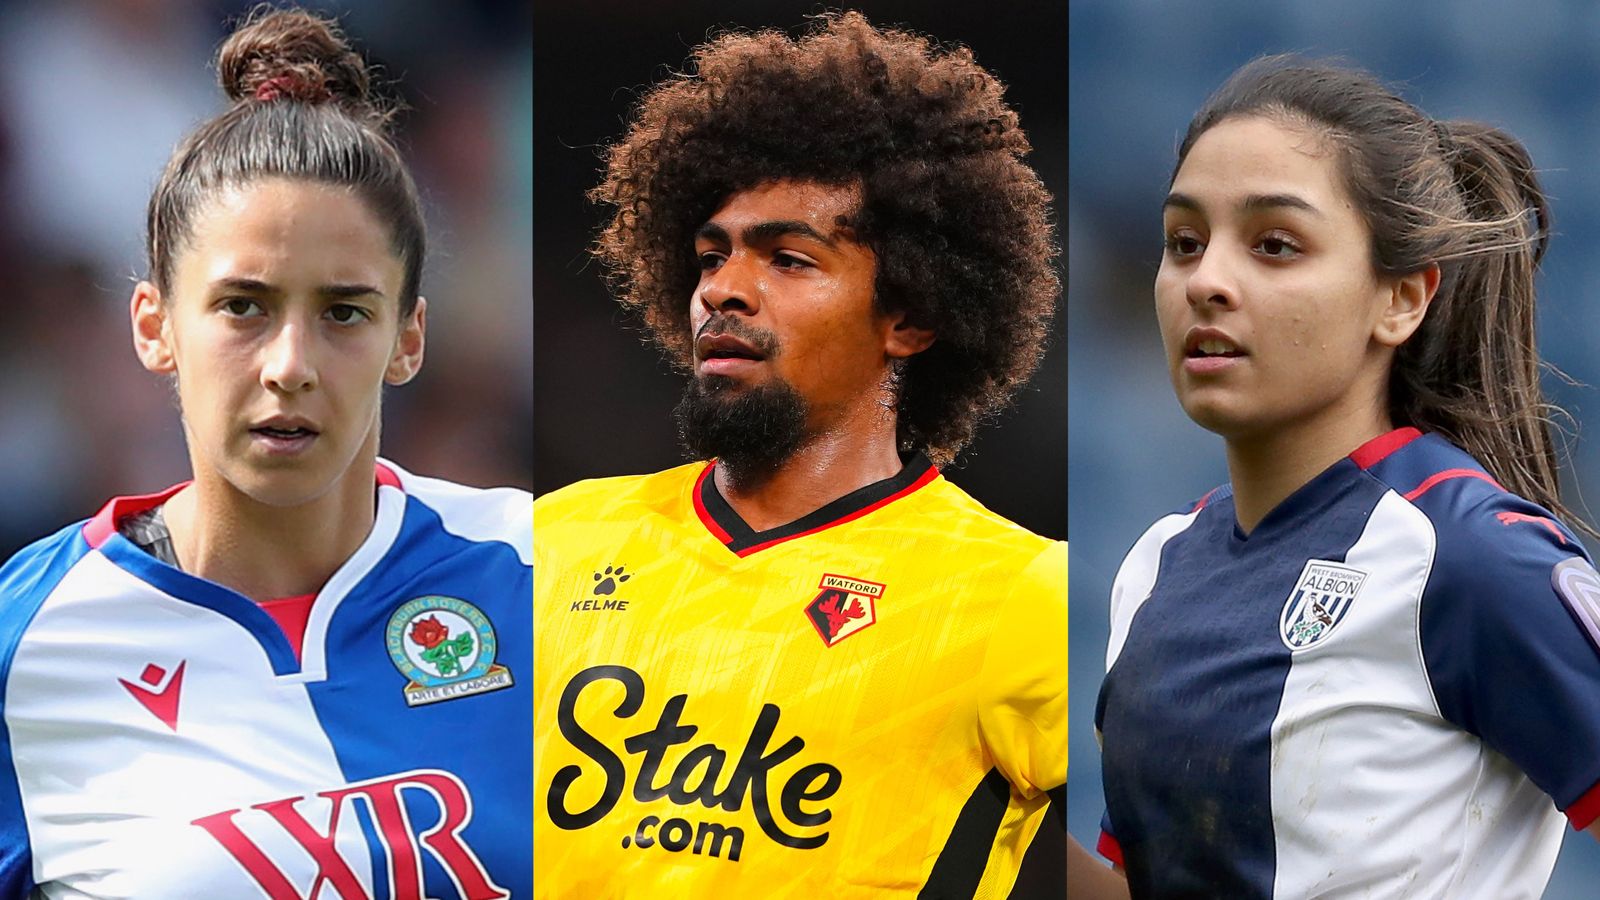 British South Asians in football: Who makes it into the 2022/23 Team of the Season?